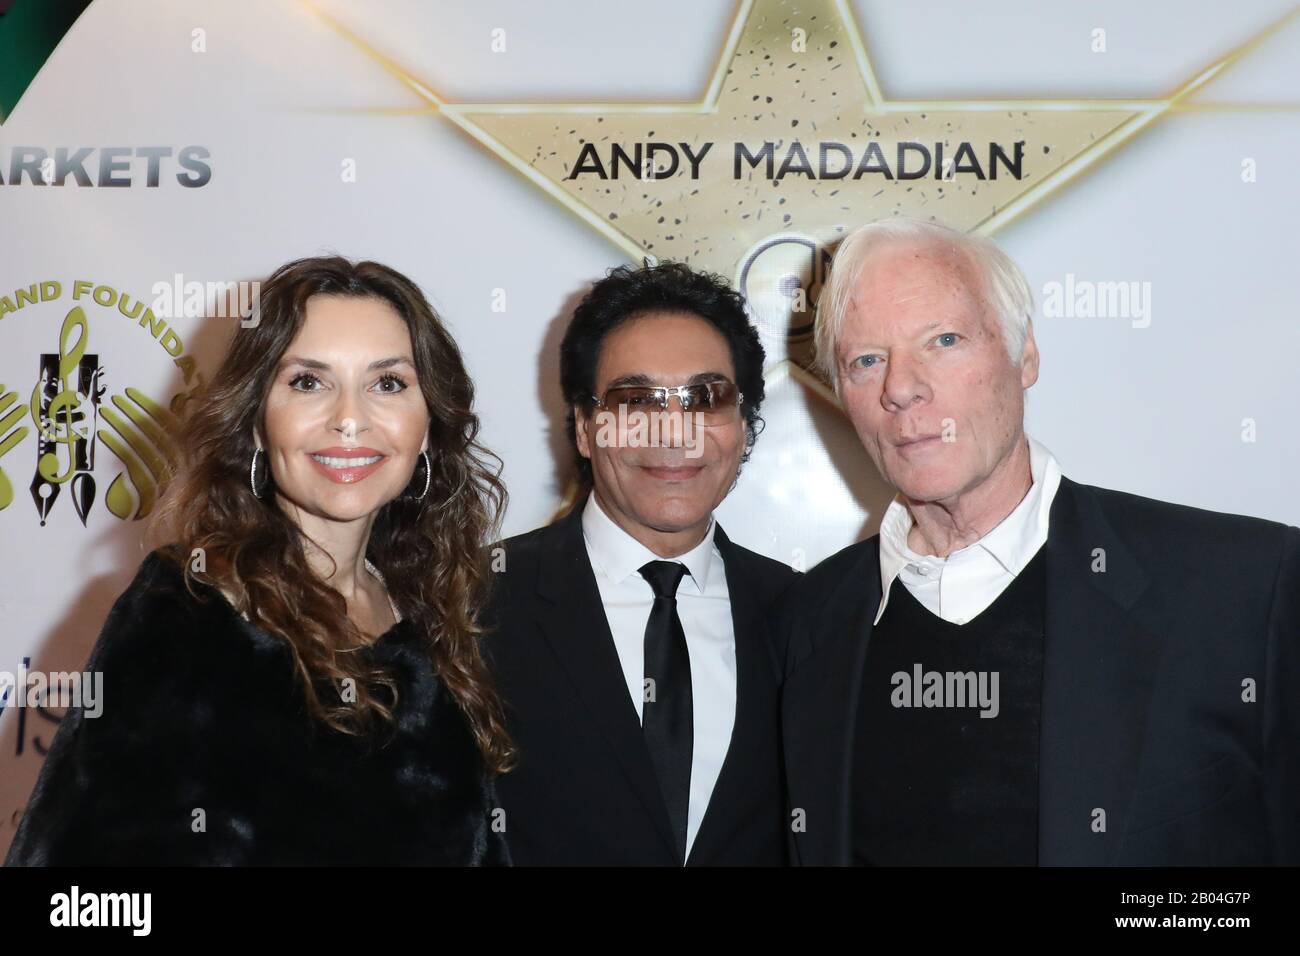 Andy Madadian Walk of Fame Star After Party at the Hollywood Museum in Hollywood, California on January 17, 2020 Featuring: Shani Rigsbee, Andy Madadian, Miles Copeland III Where: Hollywood, California, United States When: 17 Jan 2020 Credit: Sheri Determan/WENN.com Stock Photo